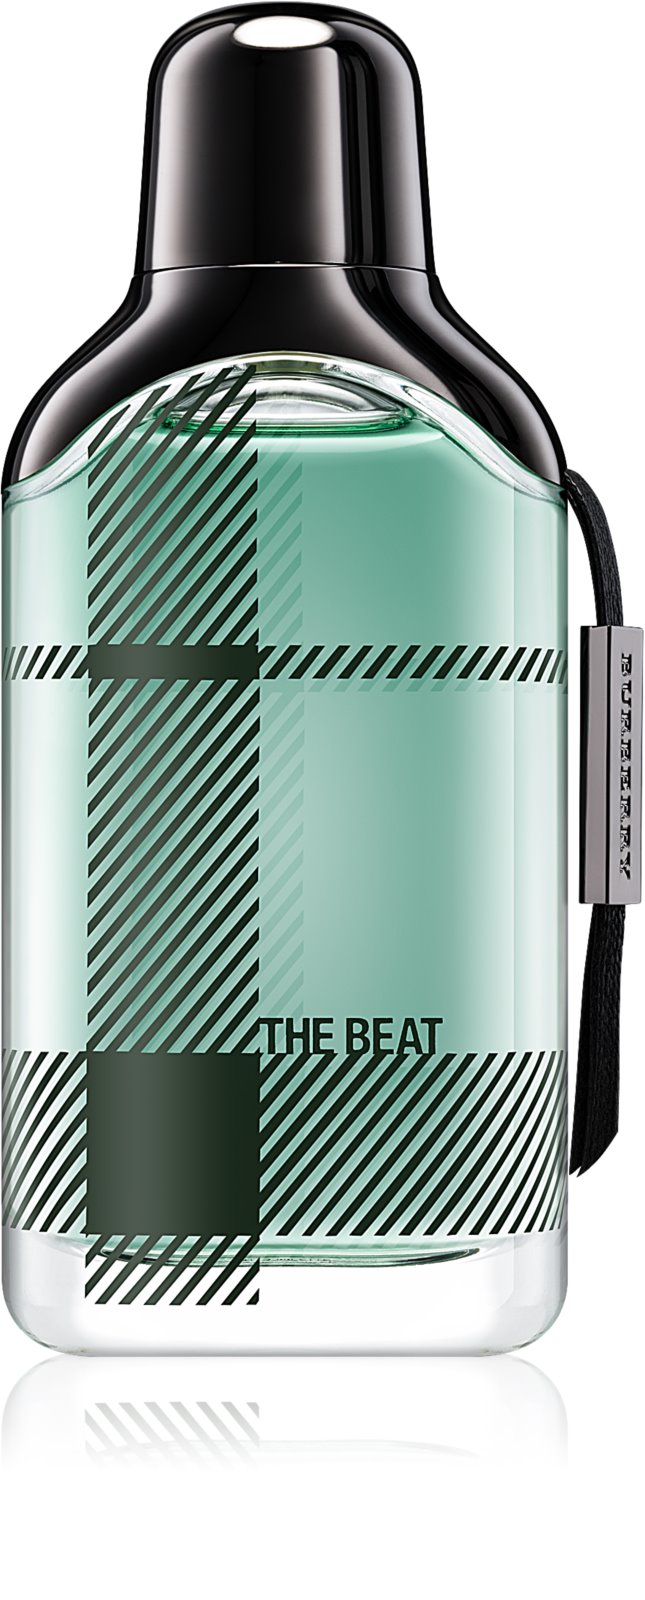 Burberry The Beat EDT for Men - Perfume Planet 